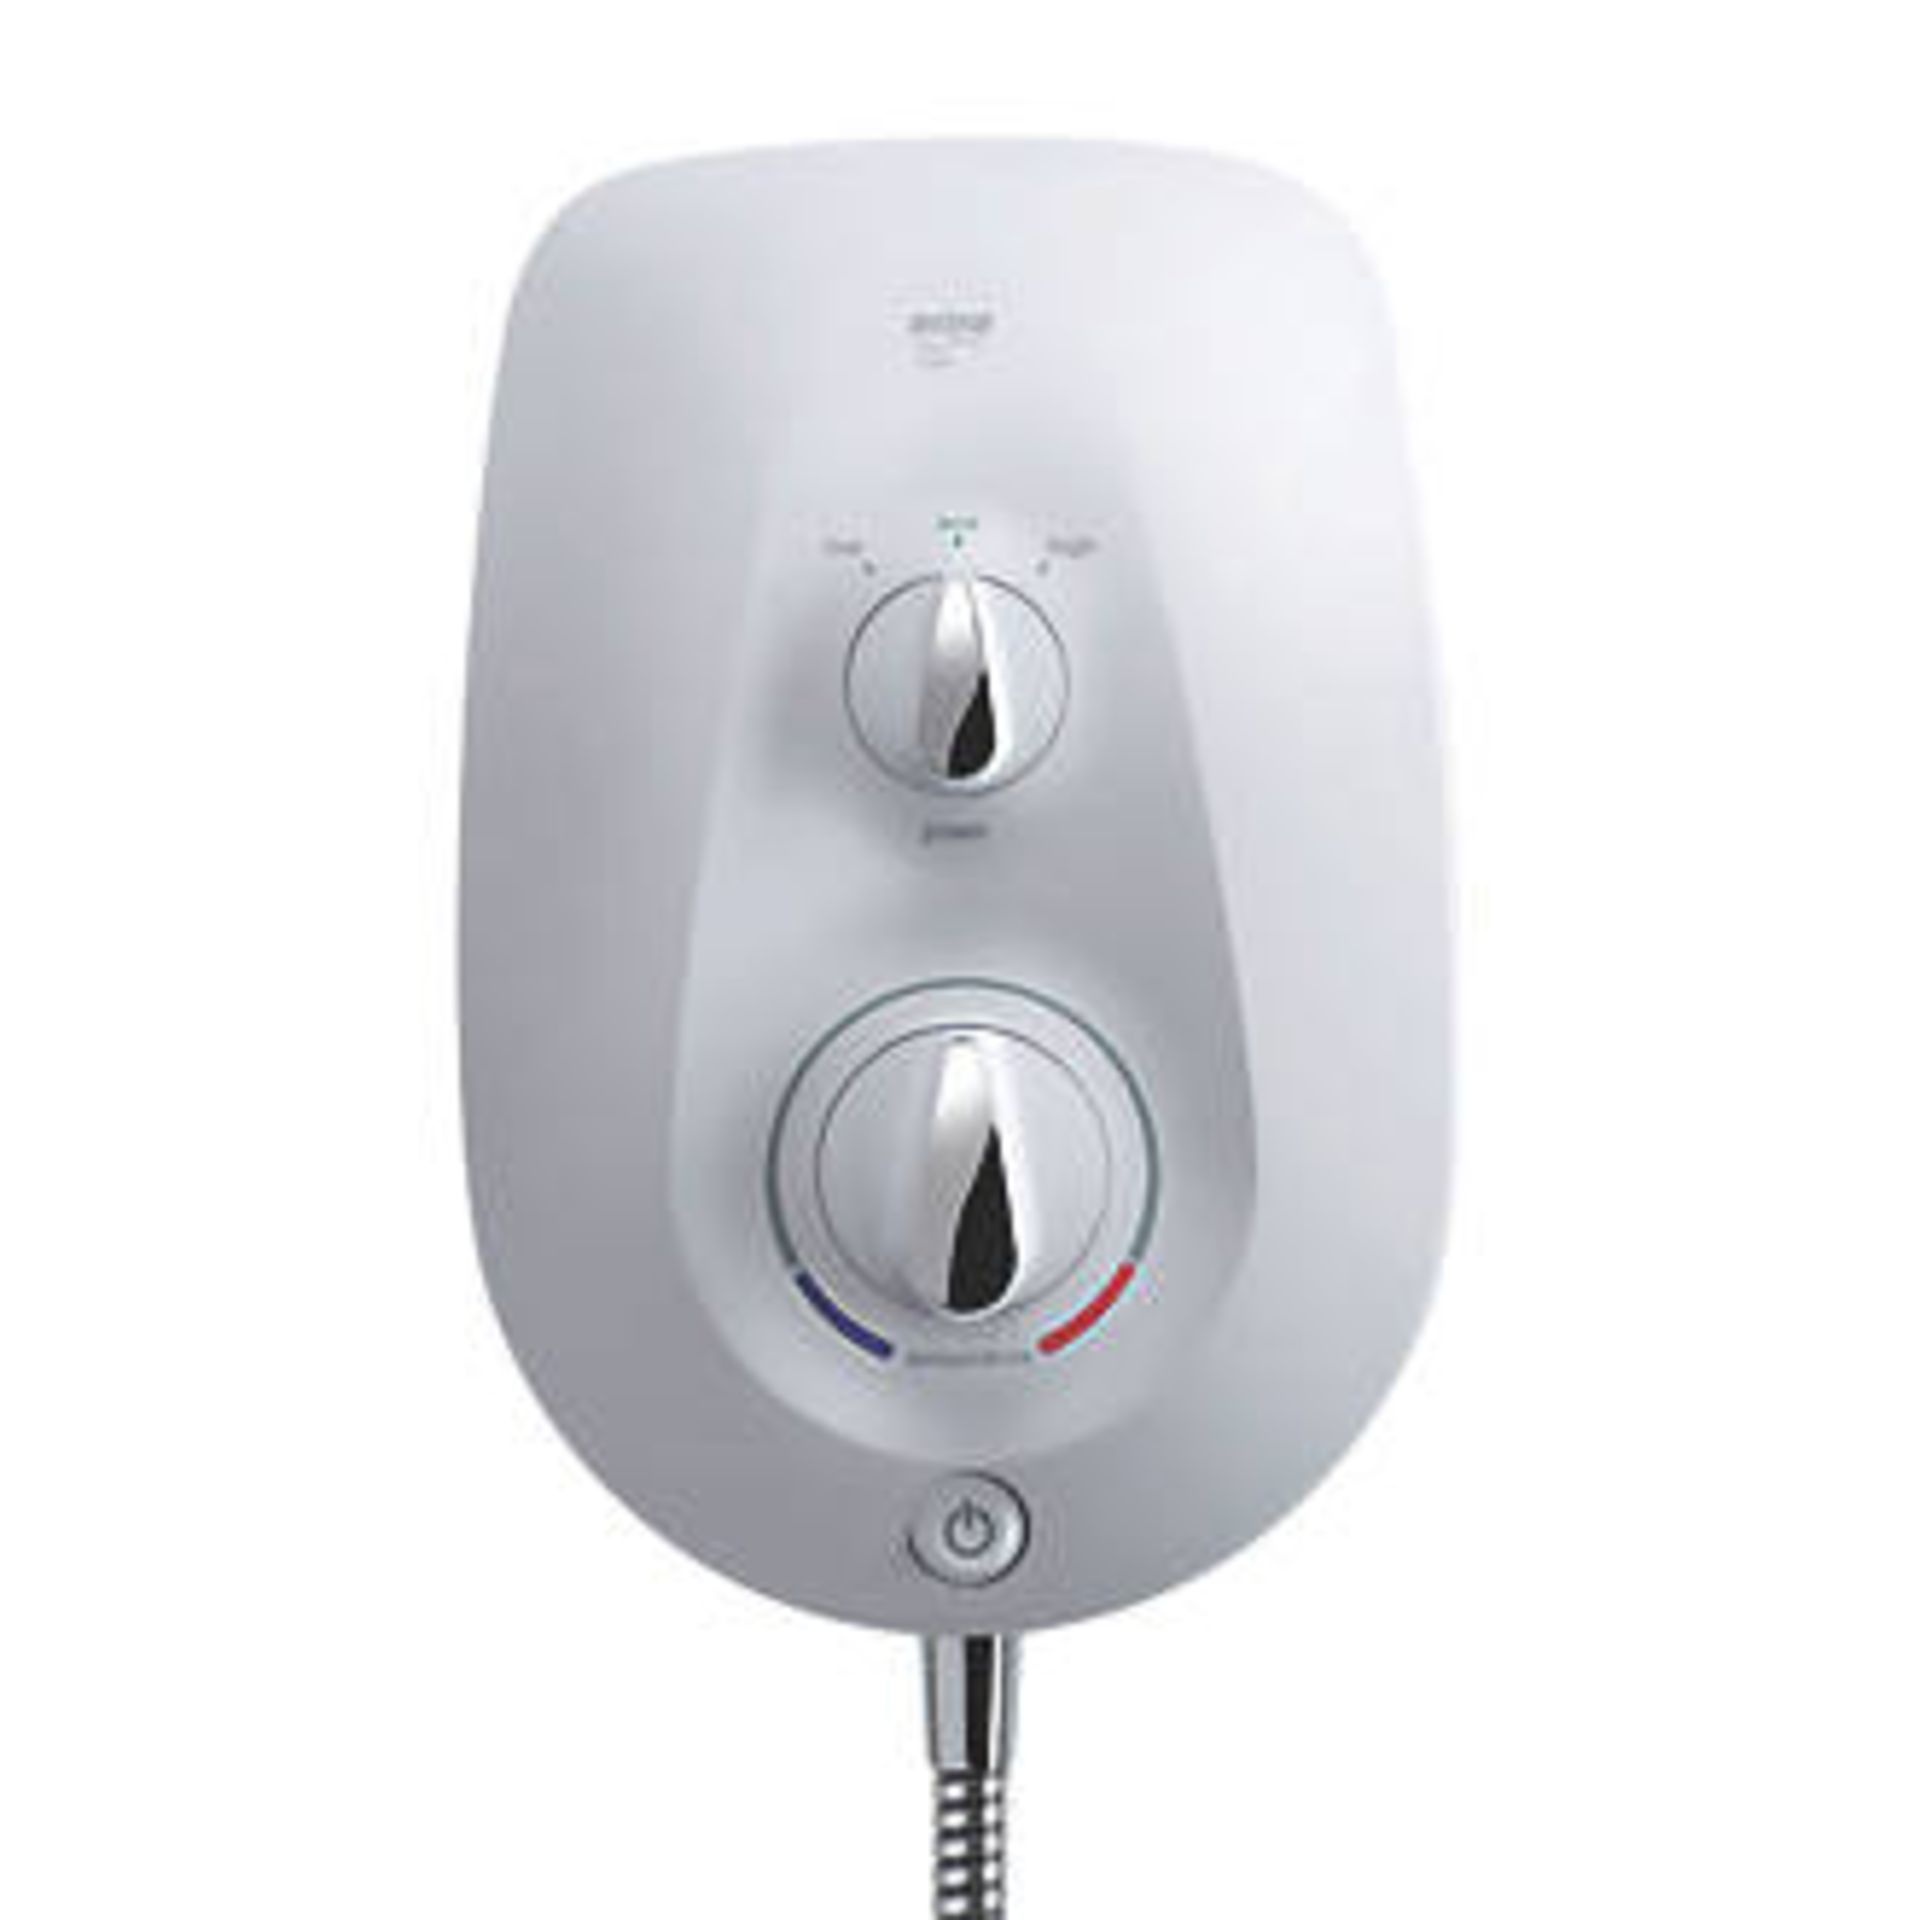 (XL67) Mira Go White 10.8kW Electric Shower. RRP £324.99. Contemporary electric shower with pr...( - Image 3 of 4